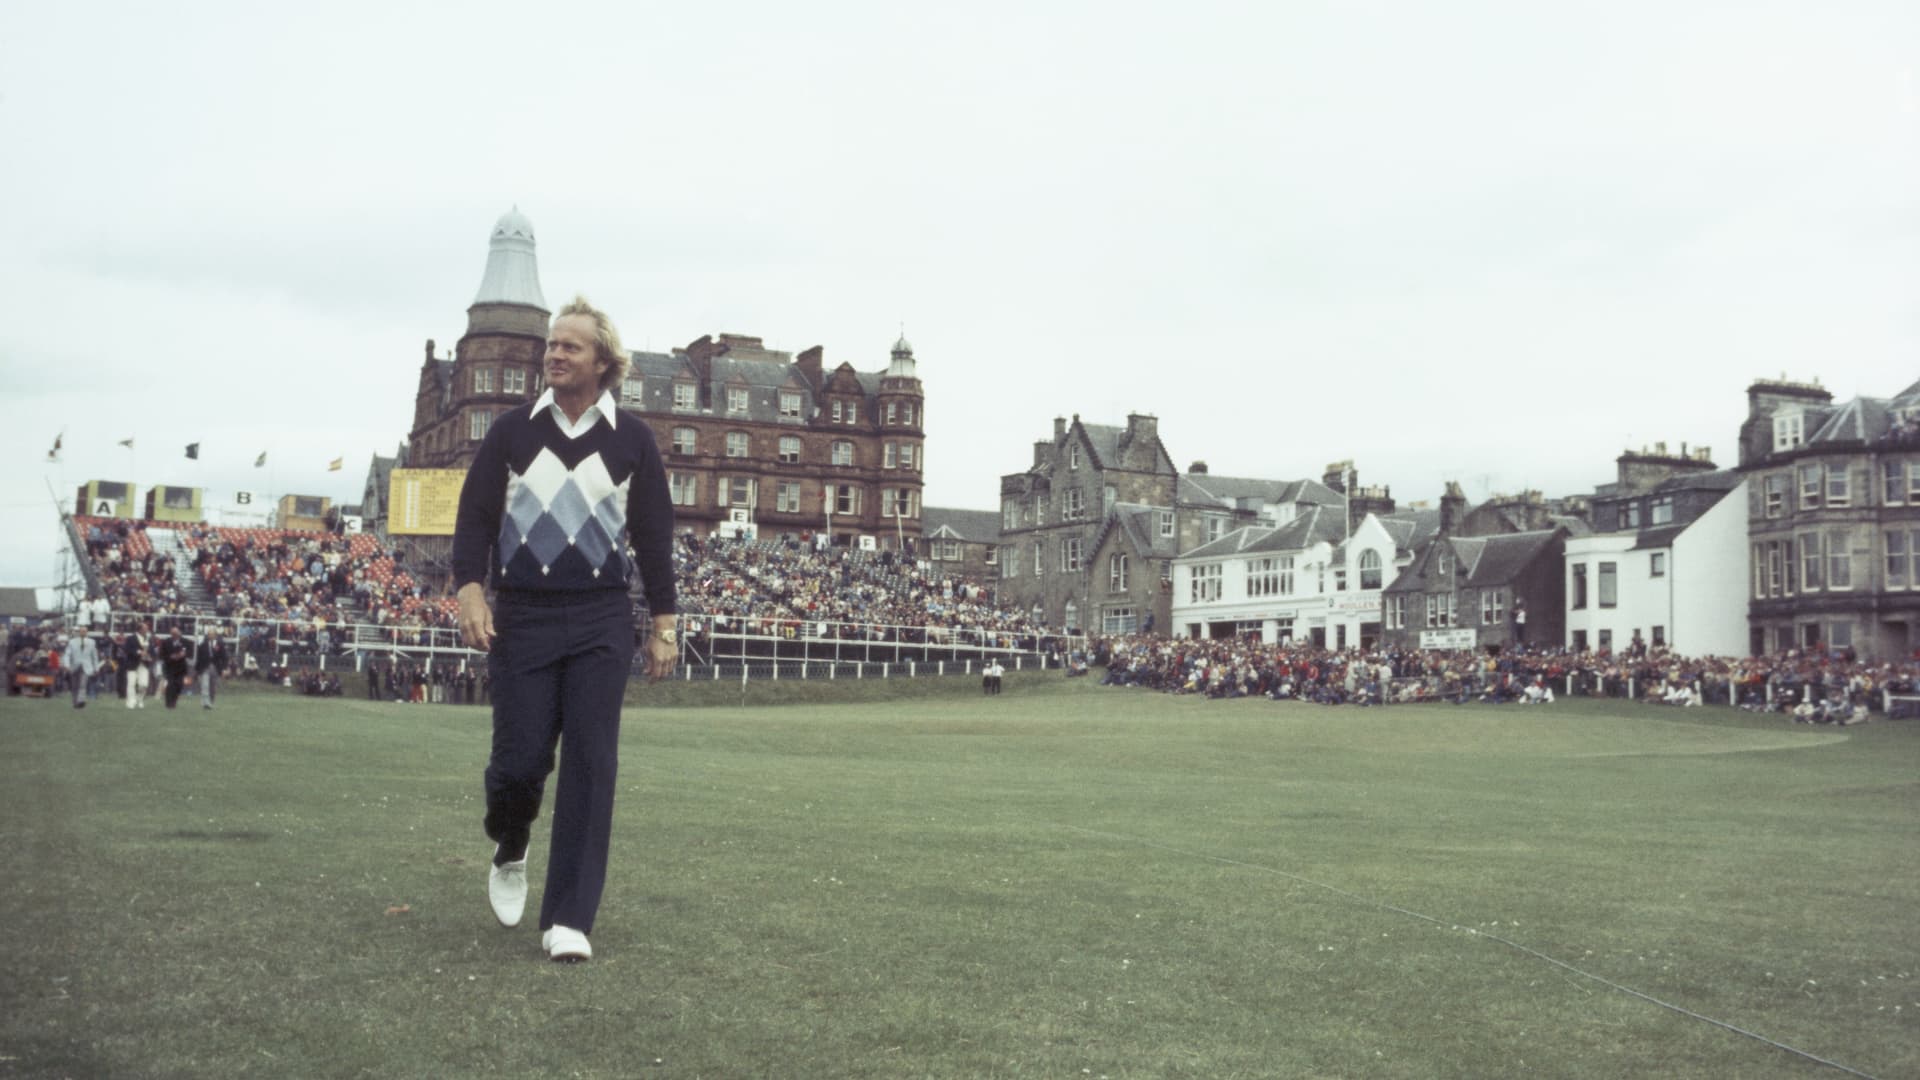 Jack Nicklaus won the 1970 Open Championship held on the Old Course at St Andrews, Scotland. The course remains one of the most popular with American visitors.